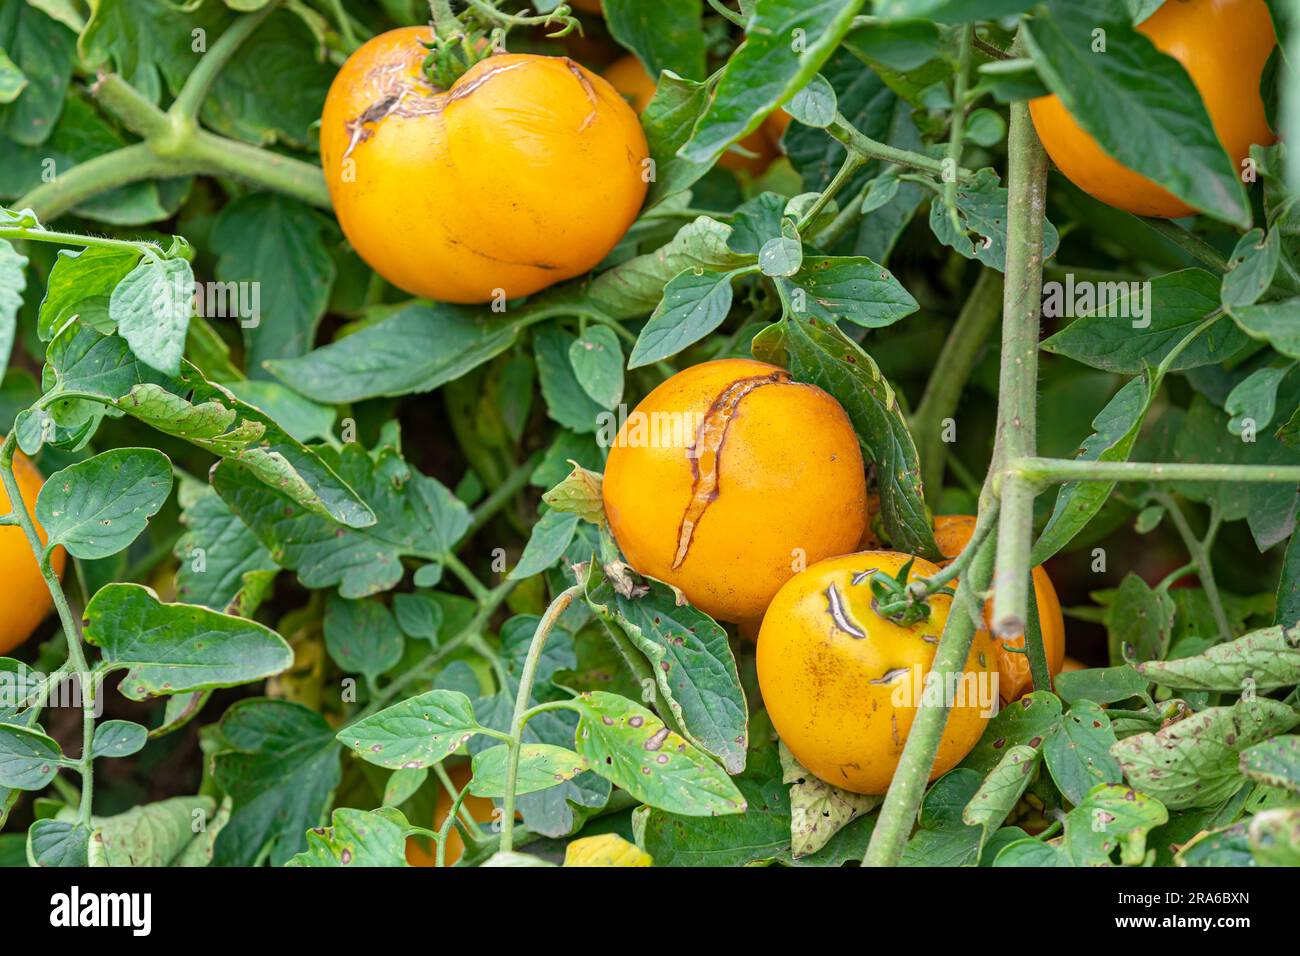 Yellow tomato cracking and splitting on vine. Gardening, imperfect food and blemished produce concept Stock Photo